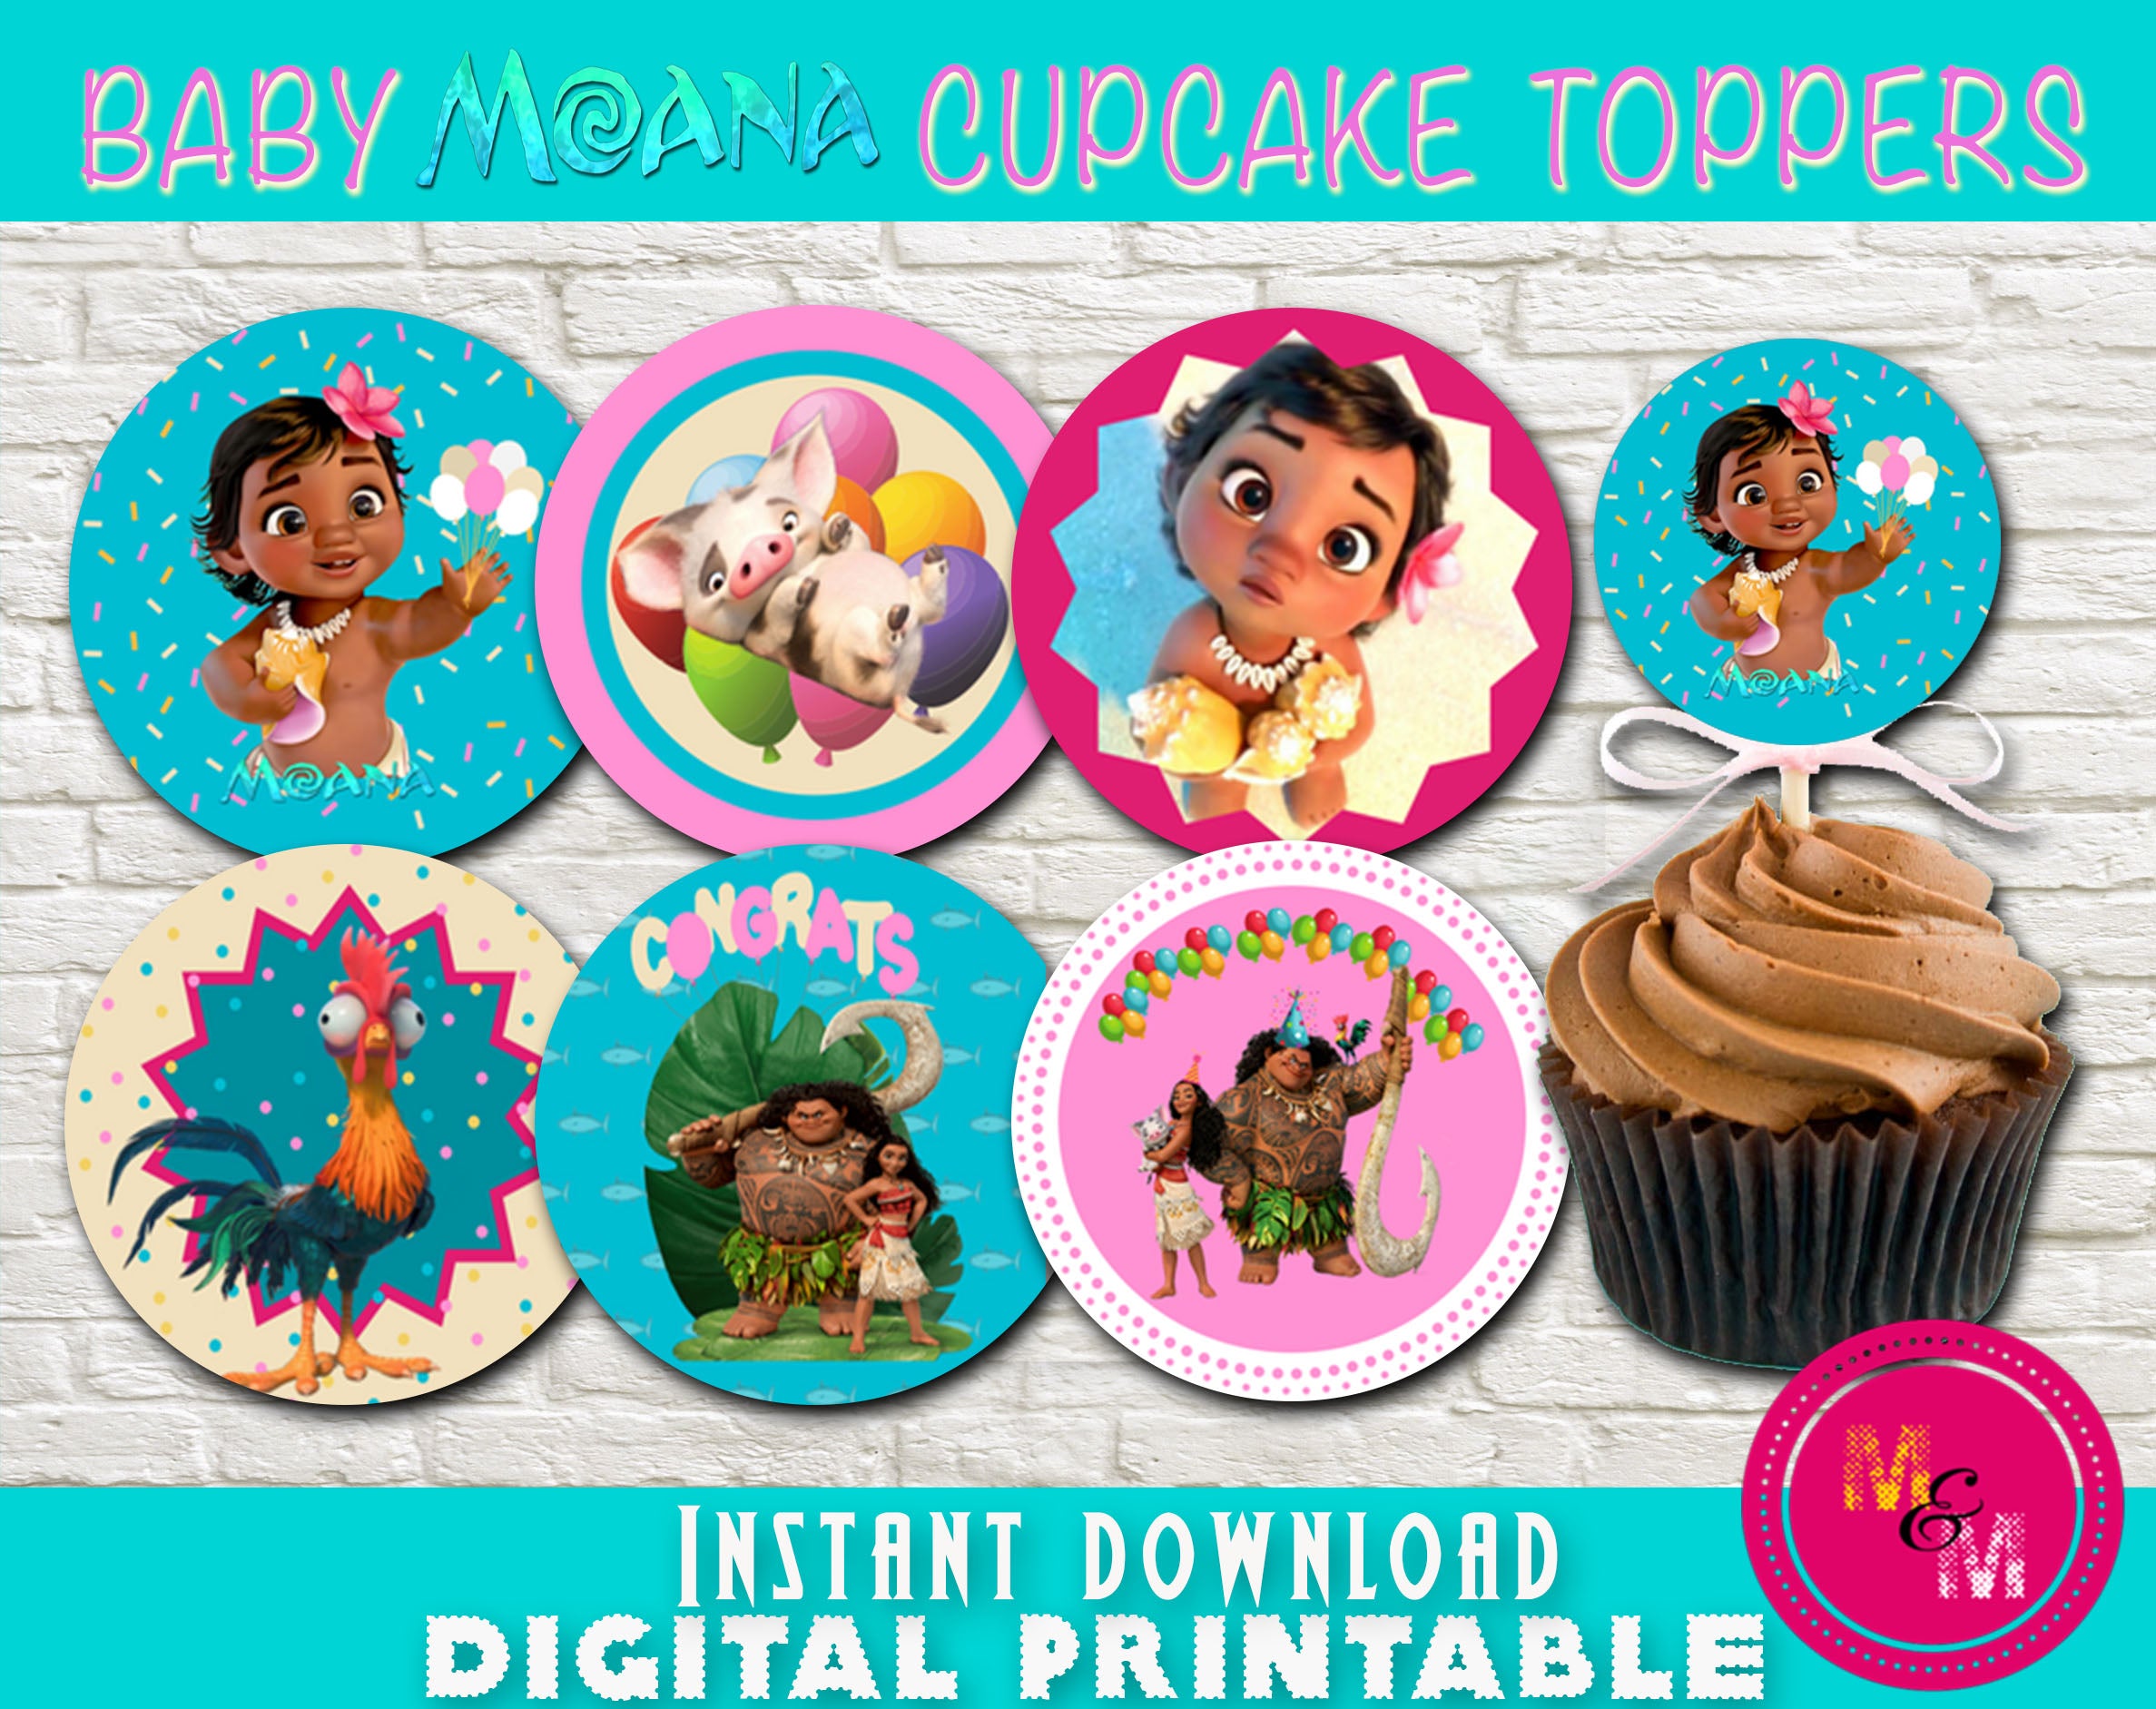 Baby Moana Cupcake Toppers Baby Moana Party Maui Party Mugandmousedesigns